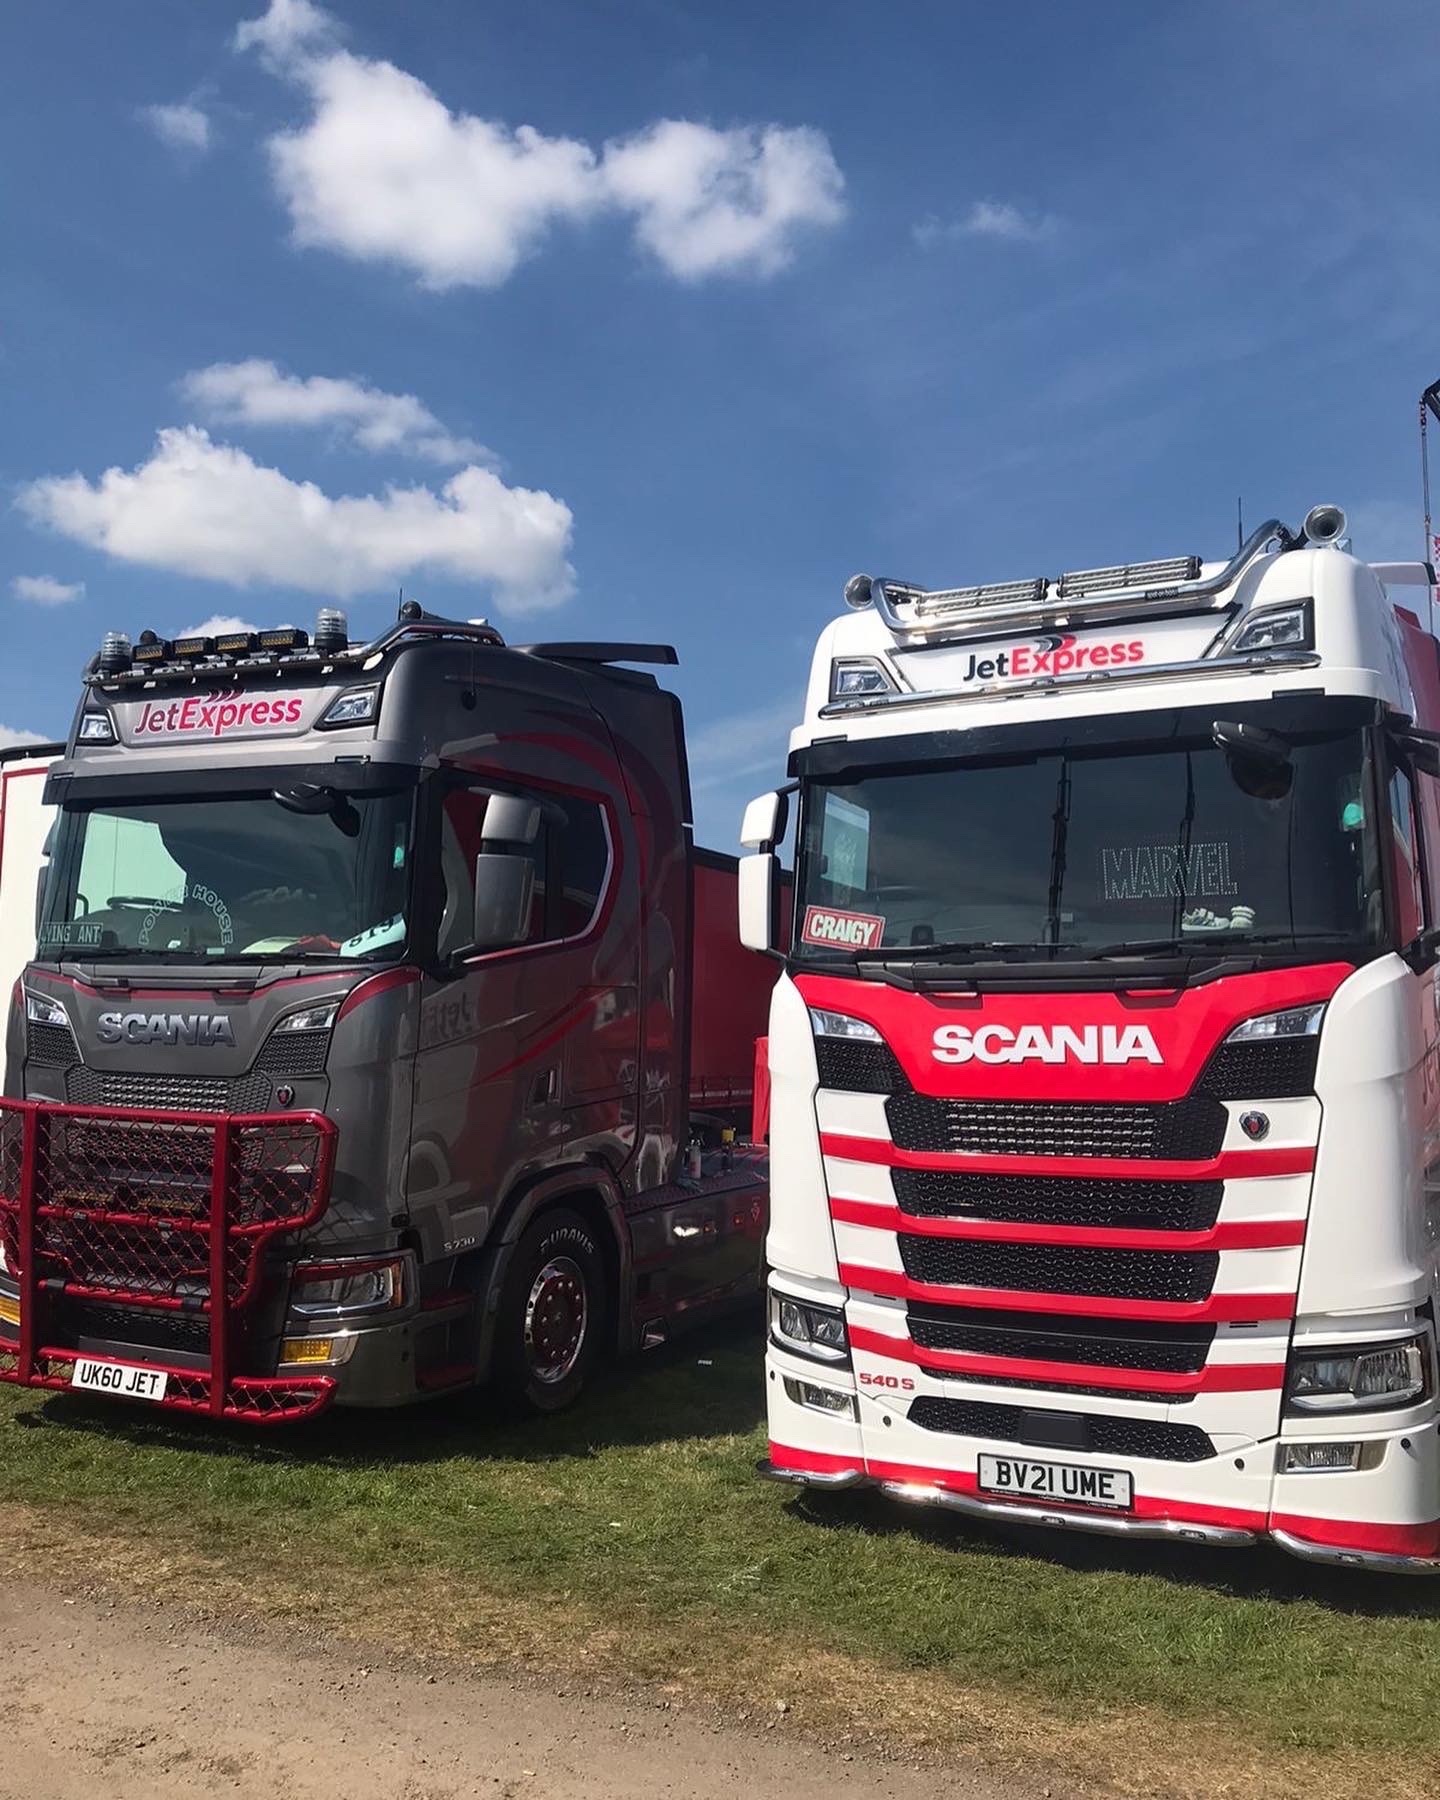 Jet Express Trucks Highly Commended at Truckfest 2022